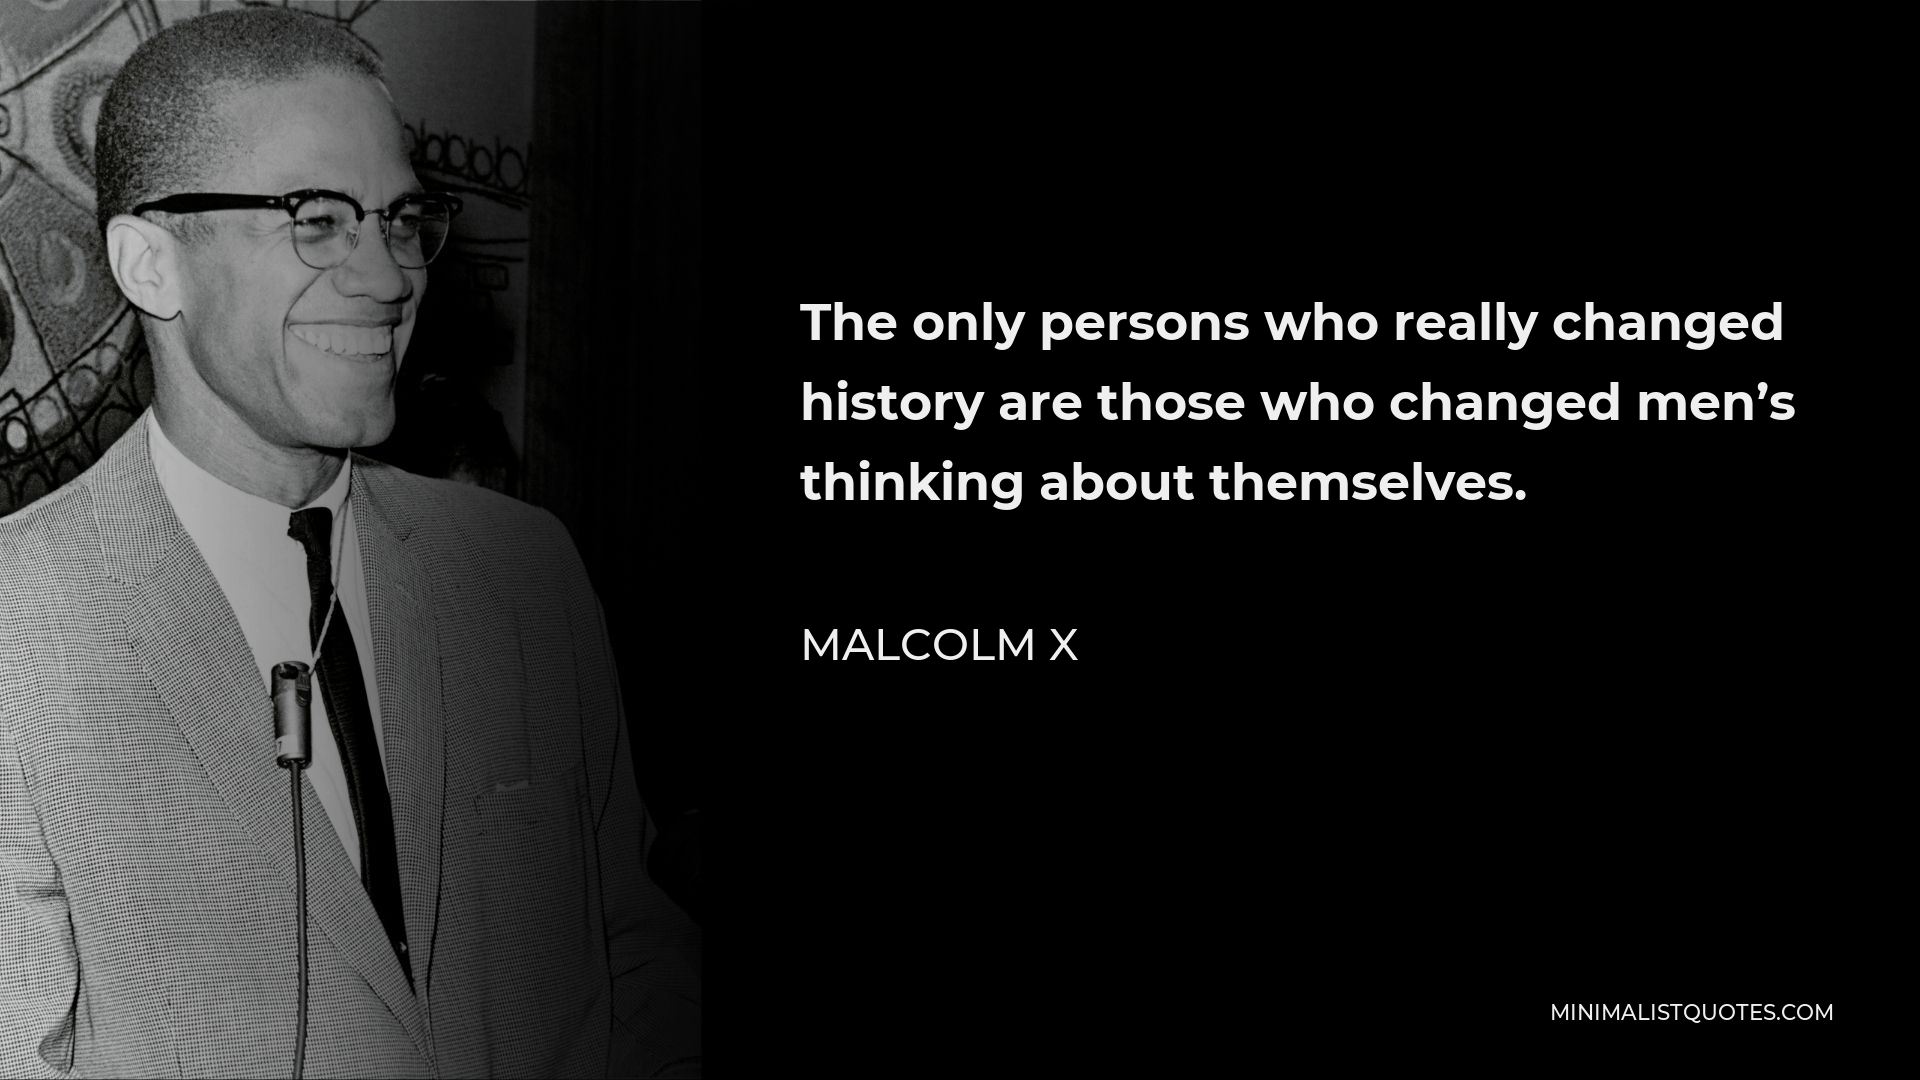 Malcolm X Quote - The only persons who really changed history are those who changed men’s thinking about themselves.